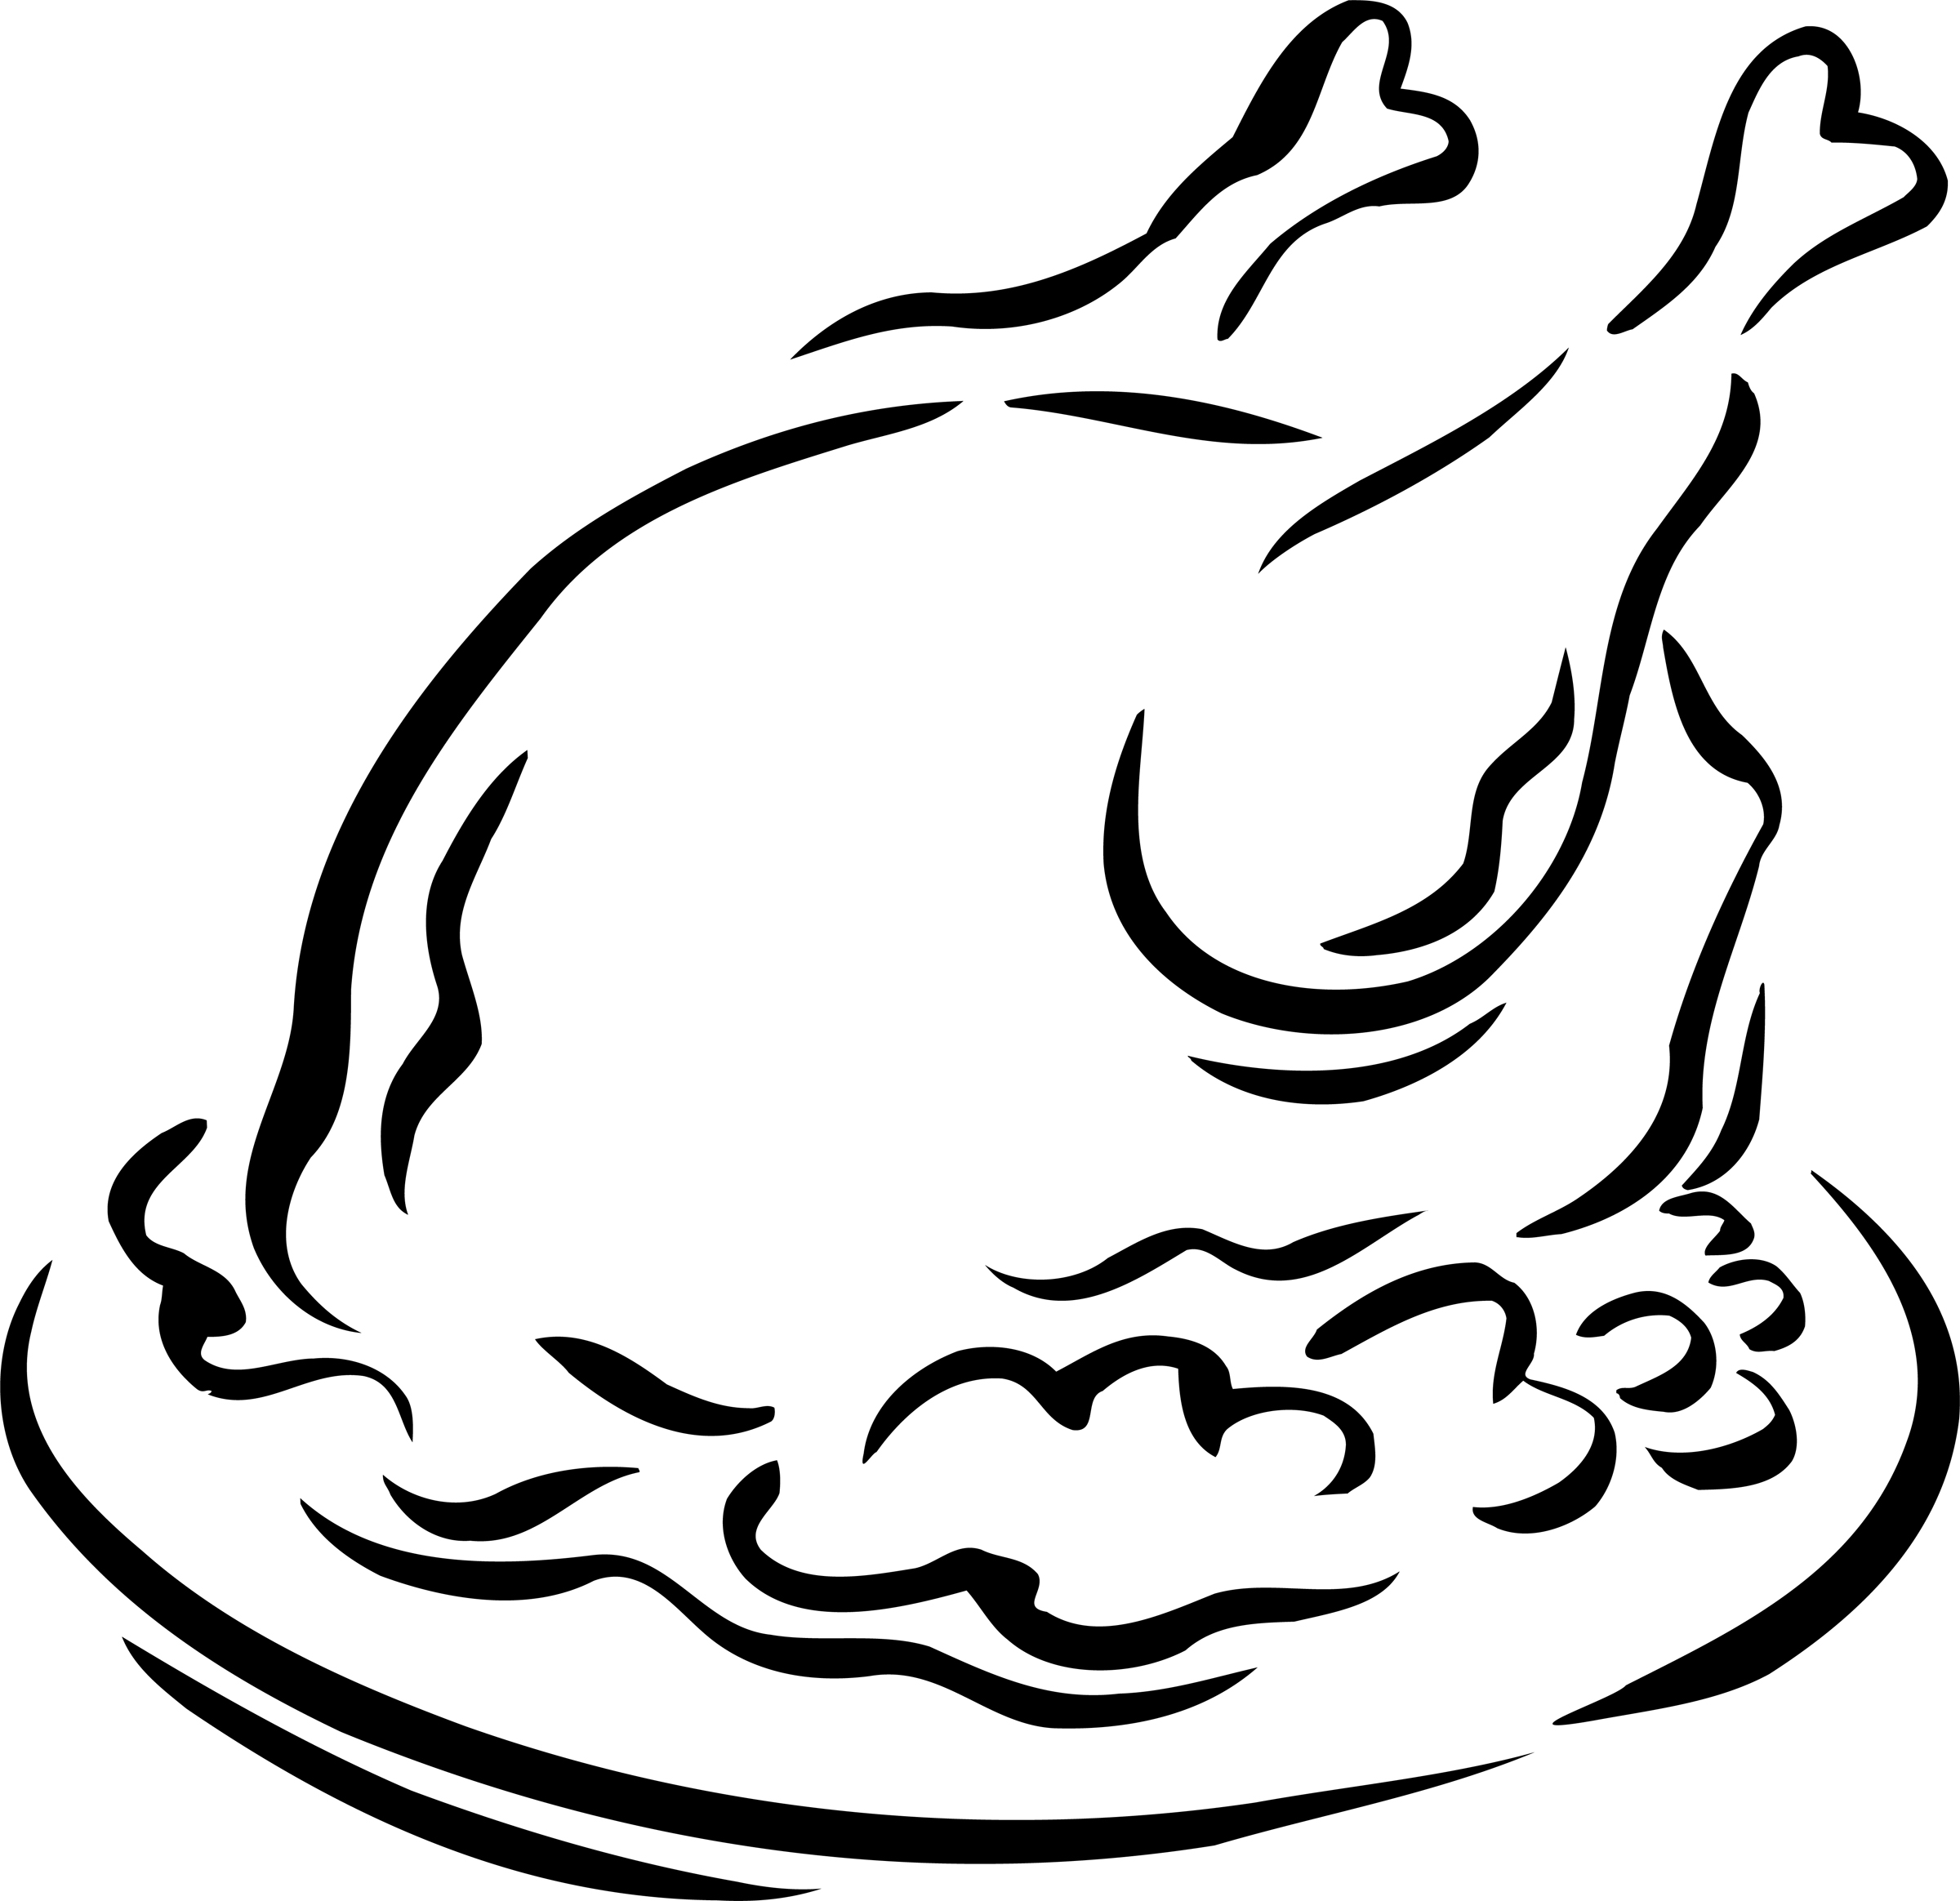 Roasted Turkey Clipart - ClipArt Best